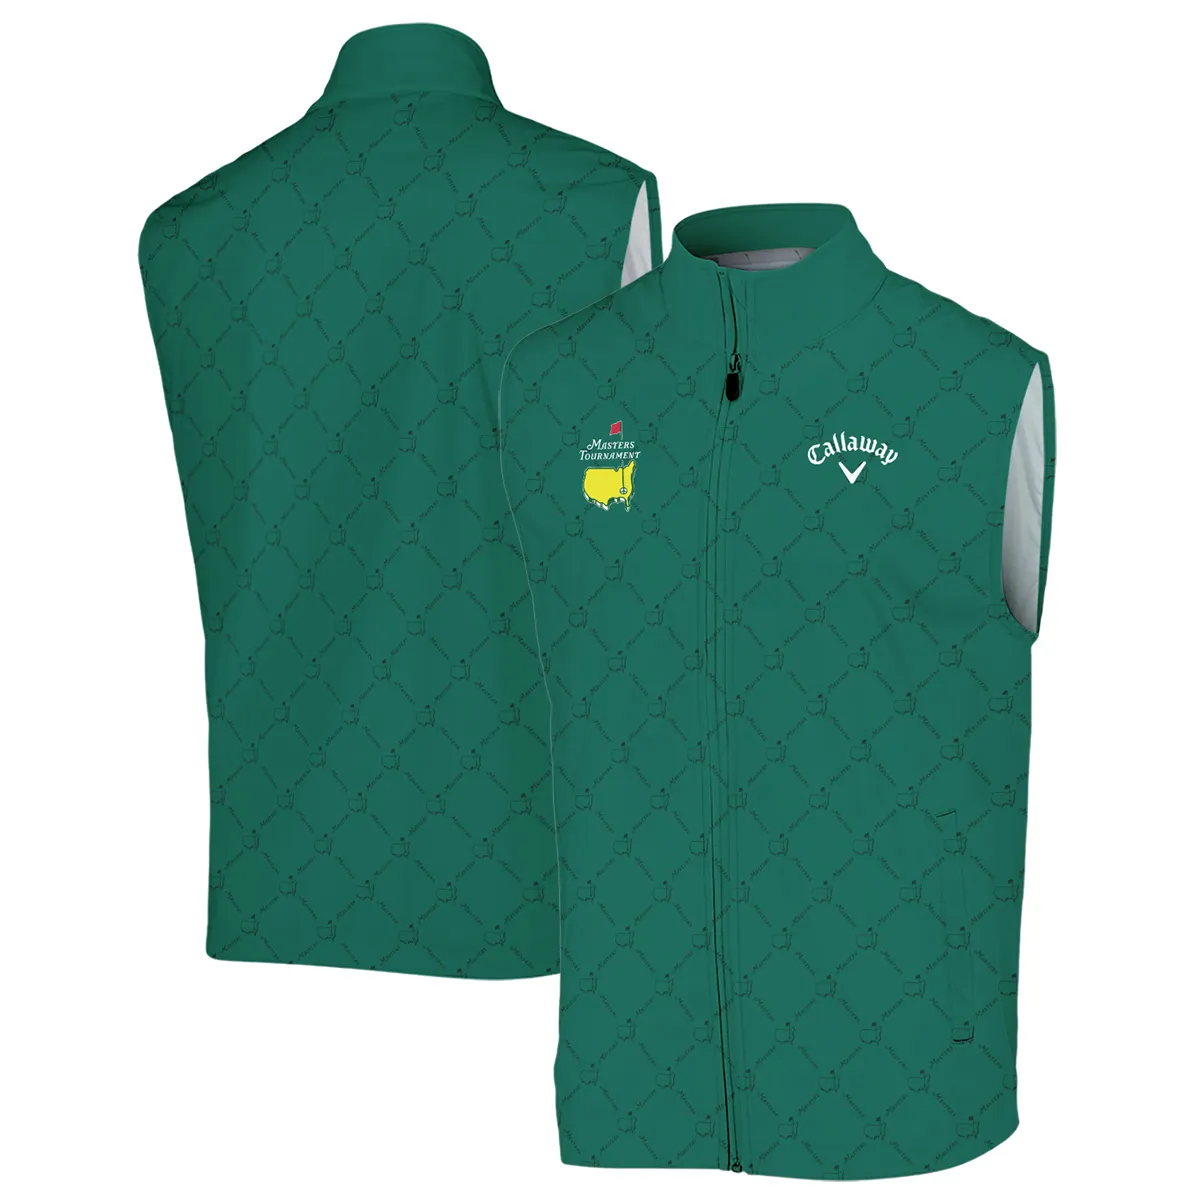 Golf Sport Pattern Color Green Mix Black Masters Tournament Callaway Hoodie Shirt Style Classic